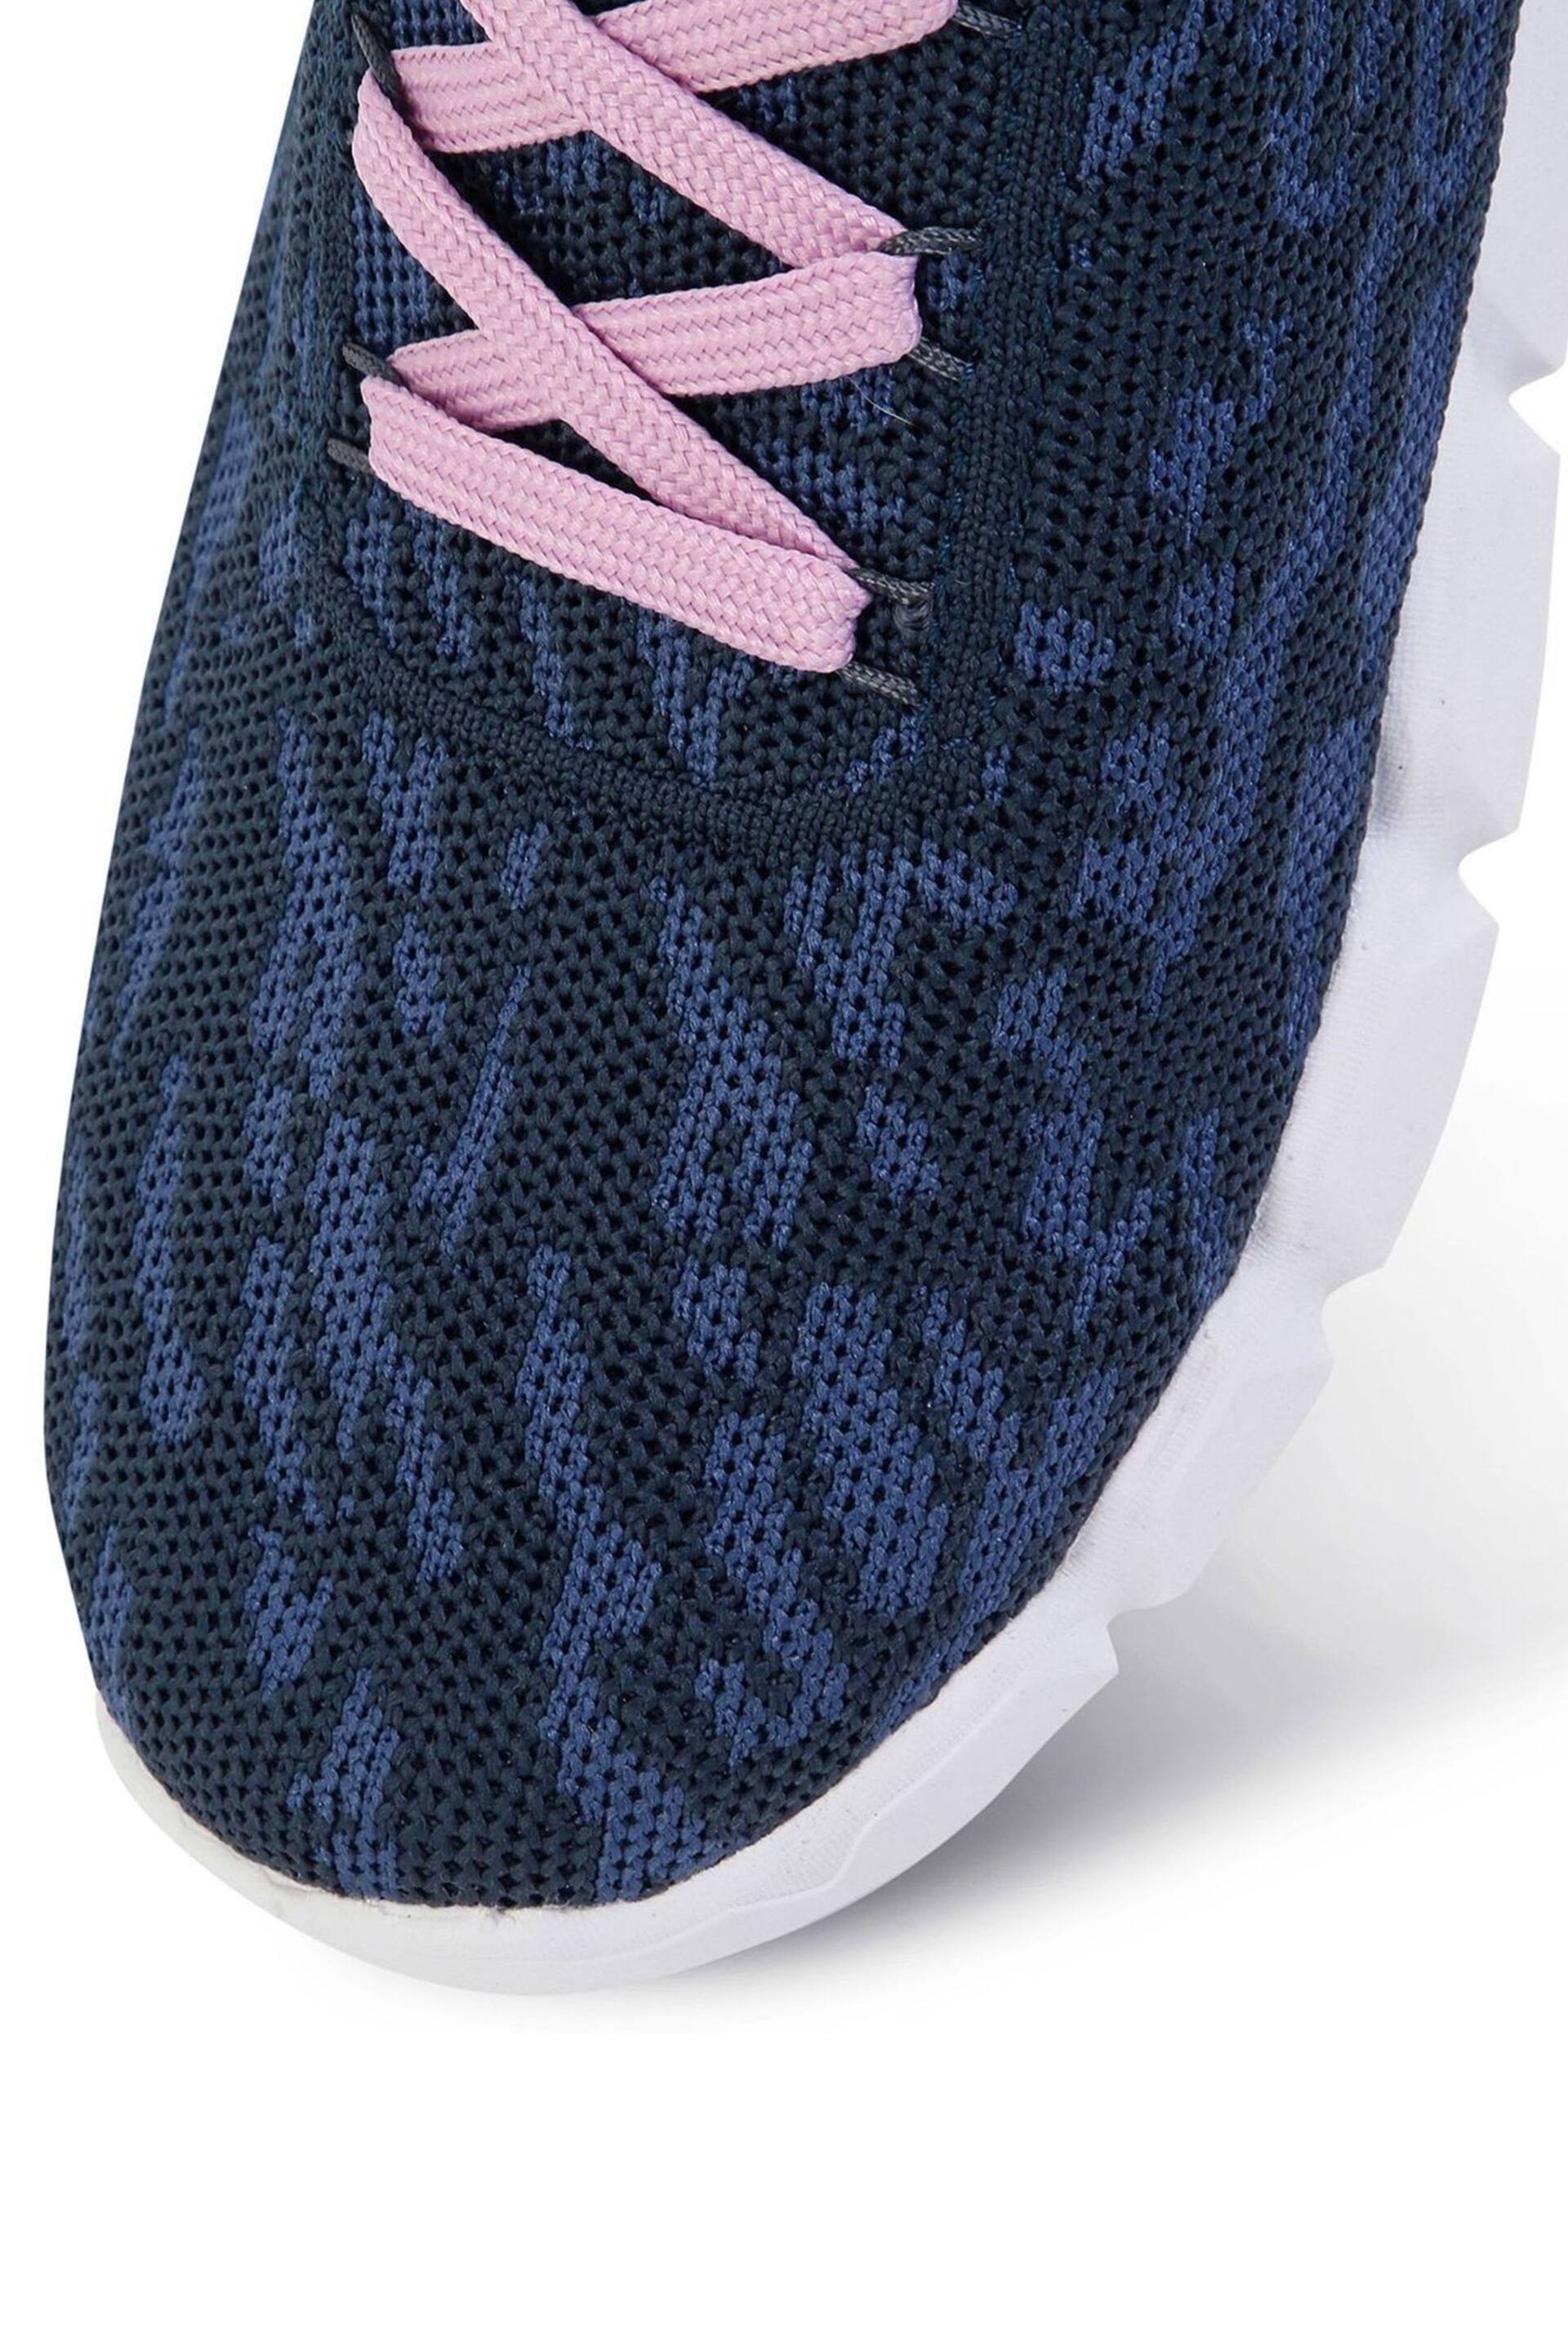 Dare 2b Hex-AT Knit Trainers - Image 7 of 7